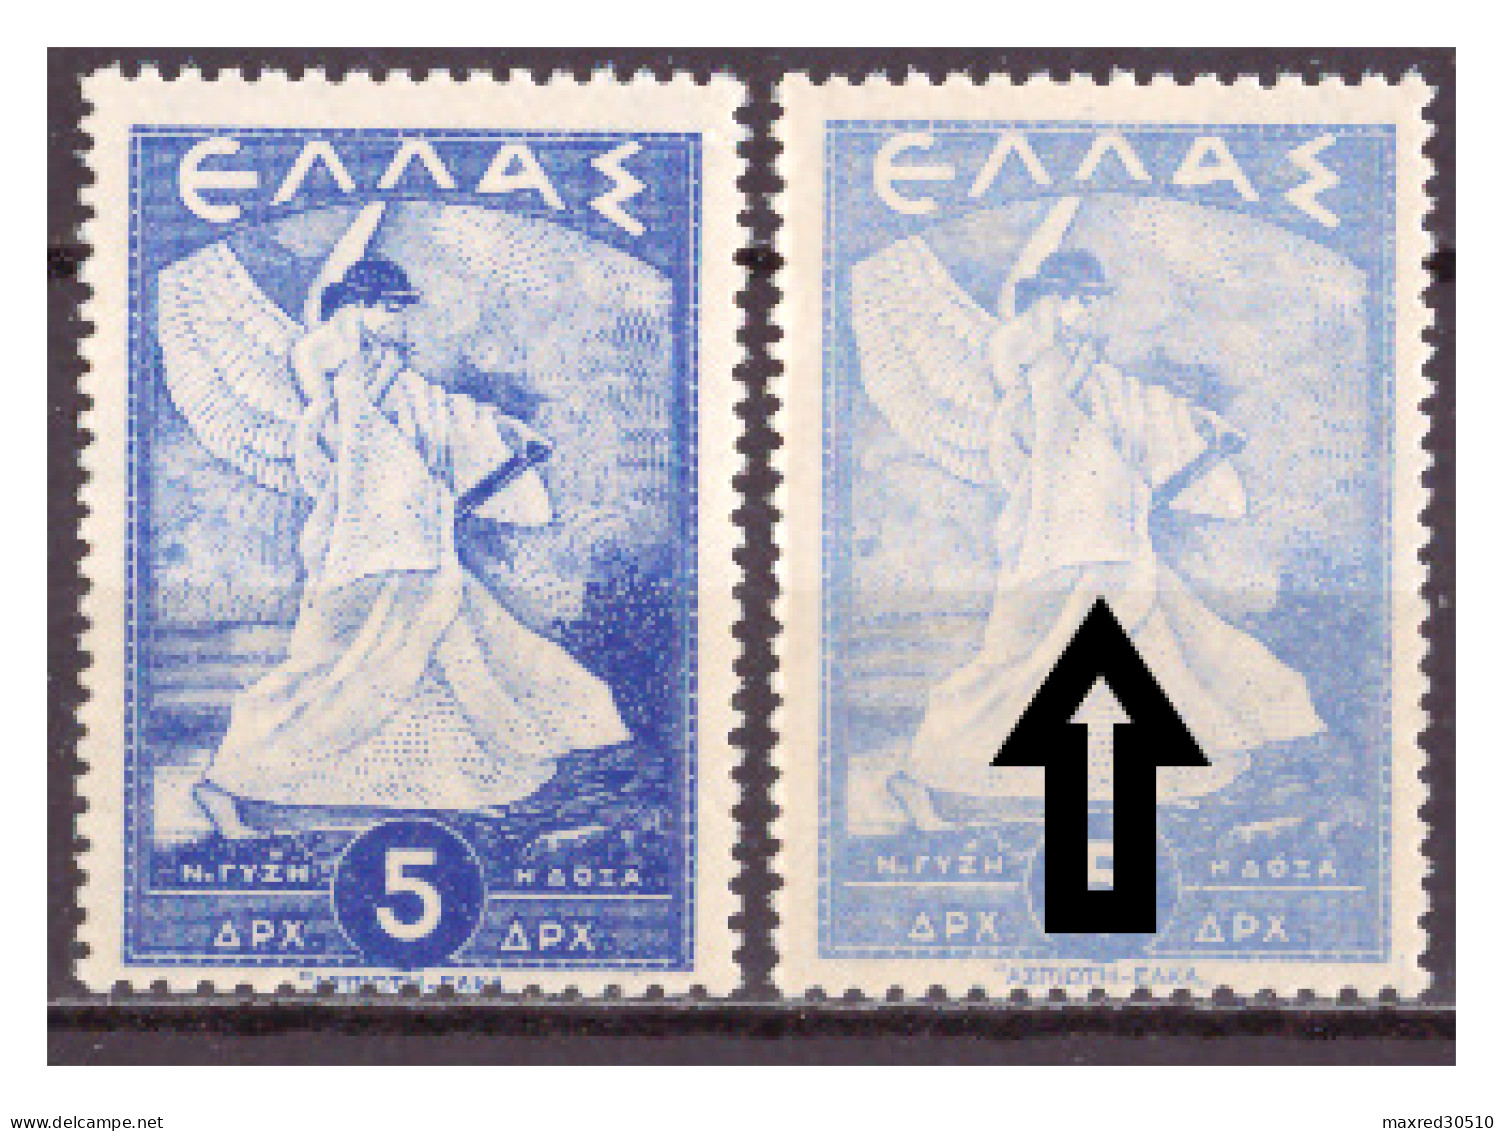 GREECE 1945 2X5L. OF THE "GLORY ISSUE" THE 2ND ONE (SEE ARROW) WITH CLEAR COLOR DIFFERENCE ERROR MNH - Variétés Et Curiosités